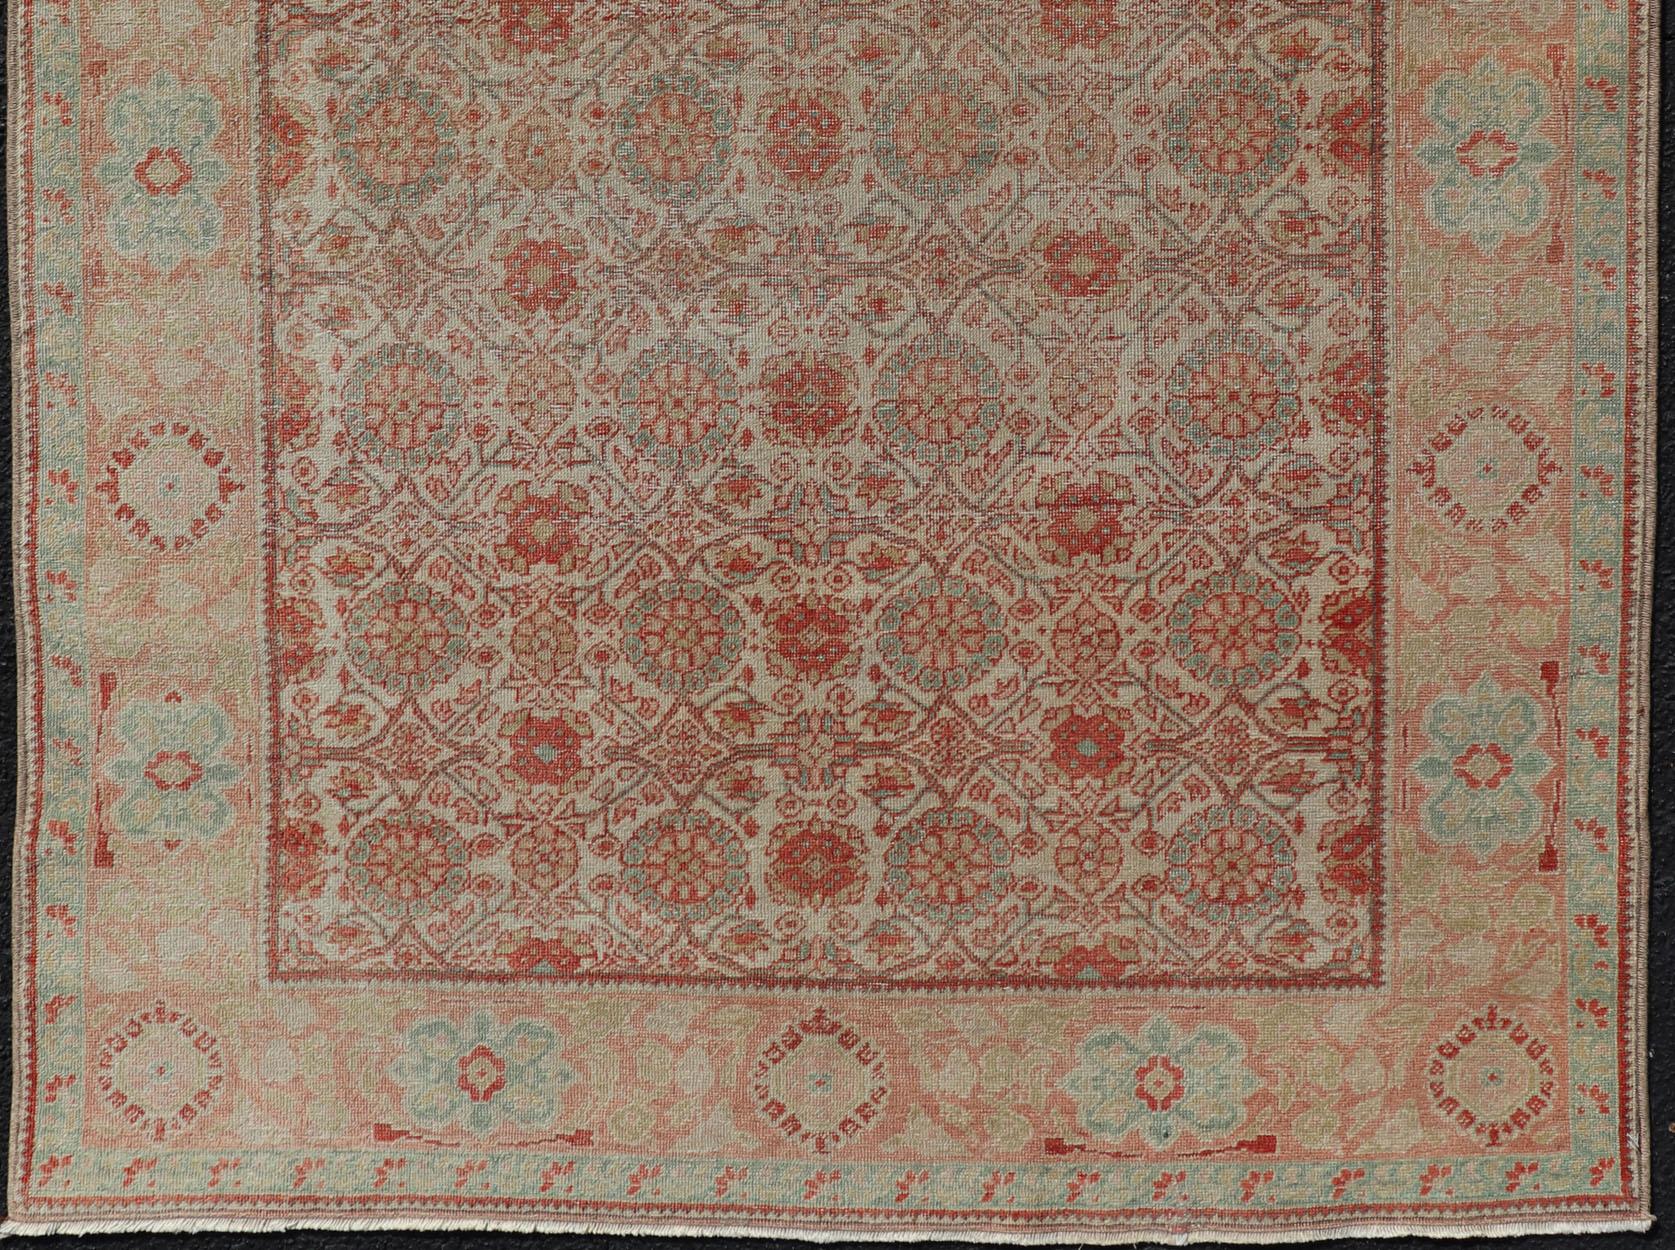 Persian Tabriz Rug with Boteh Design in Cream, Coral, Light Green/ Blue In Good Condition For Sale In Atlanta, GA